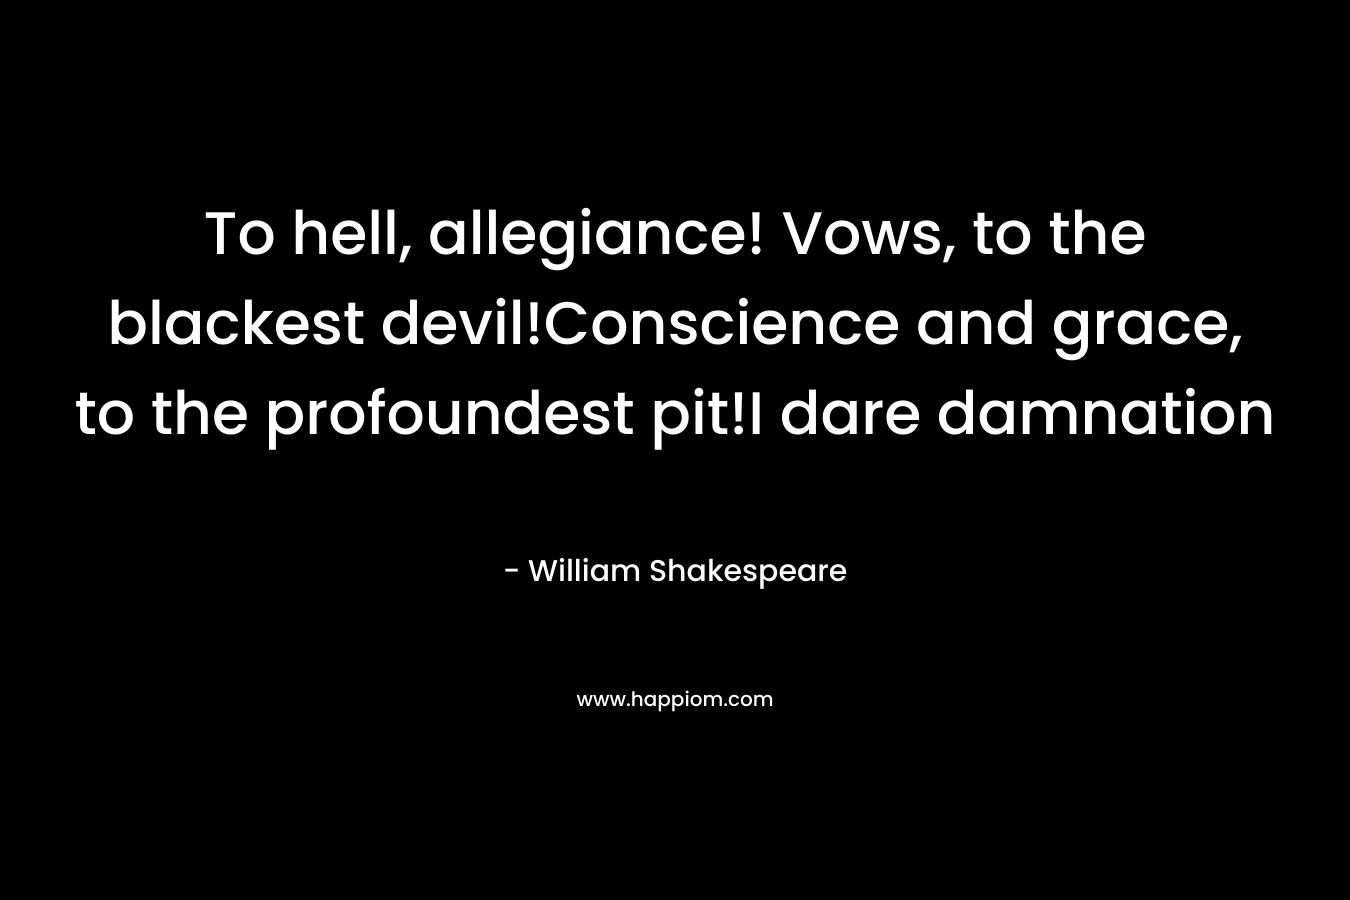 To hell, allegiance! Vows, to the blackest devil!Conscience and grace, to the profoundest pit!I dare damnation – William Shakespeare